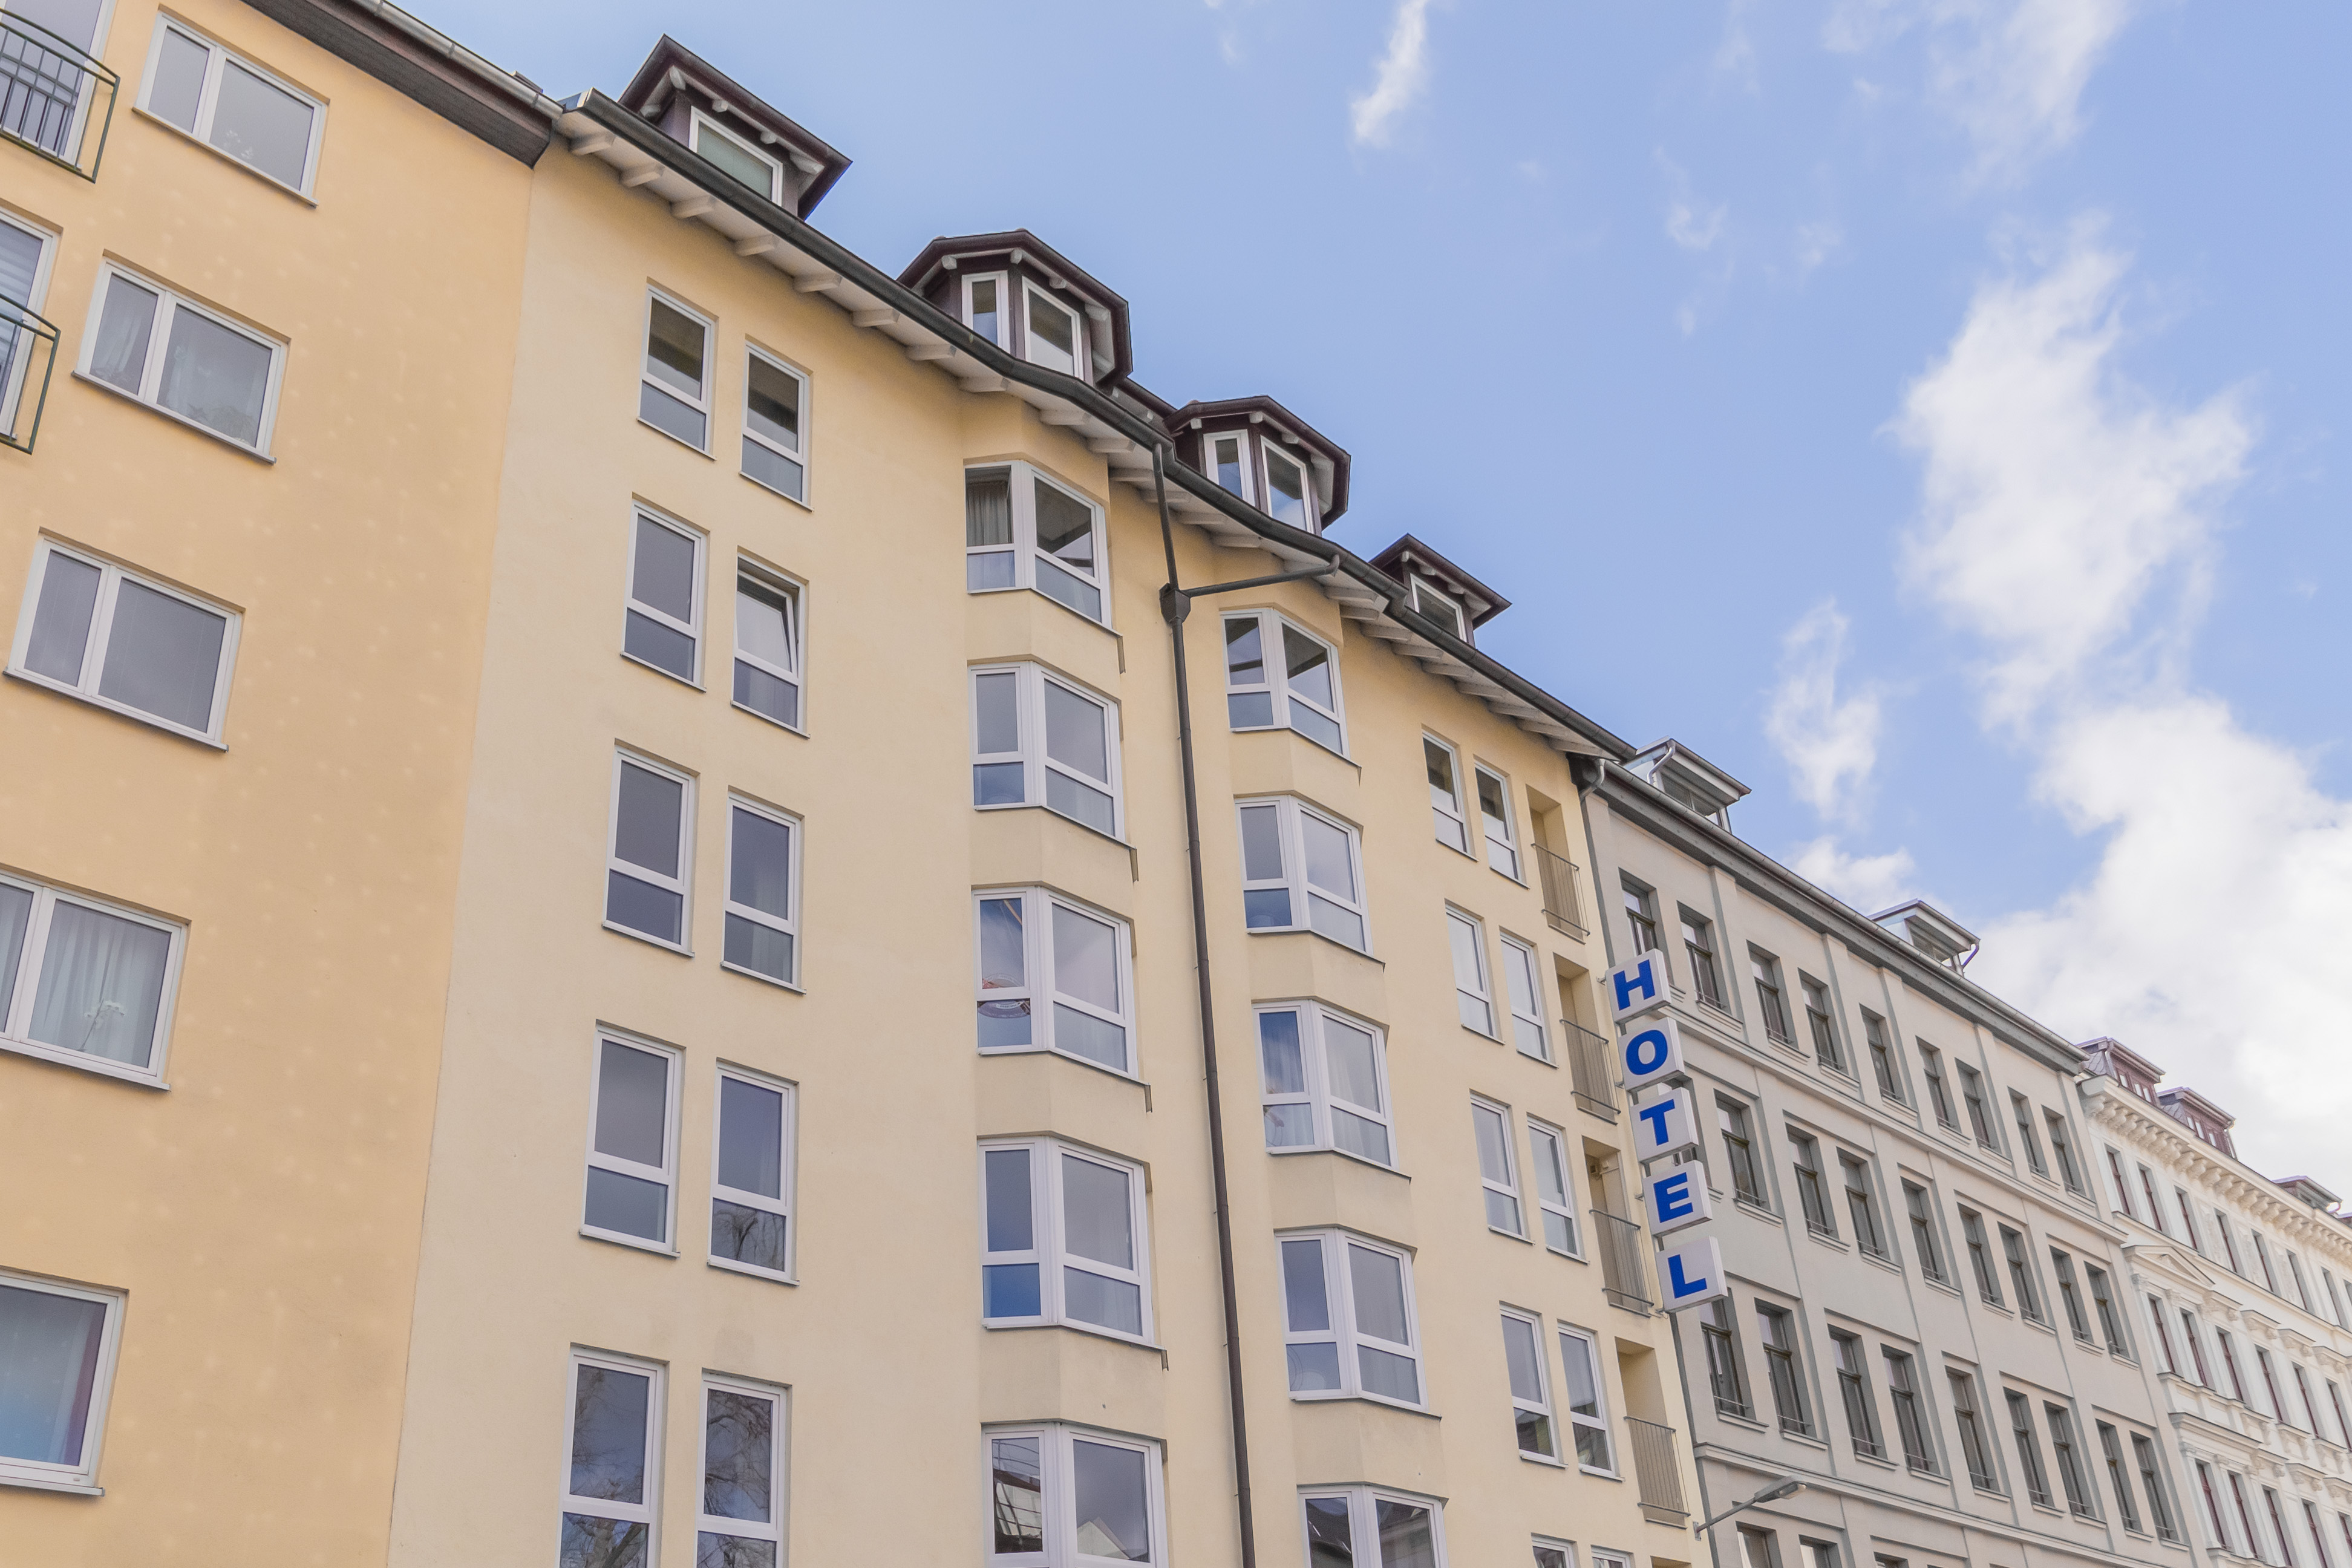 Markgraf Hotel Leipzig <br/>40.00 ew <br/> <a href='http://vakantieoplossing.nl/outpage/?id=db30cb3afe9ef4277e1bbf9e7a4a683e' target='_blank'>View Details</a>